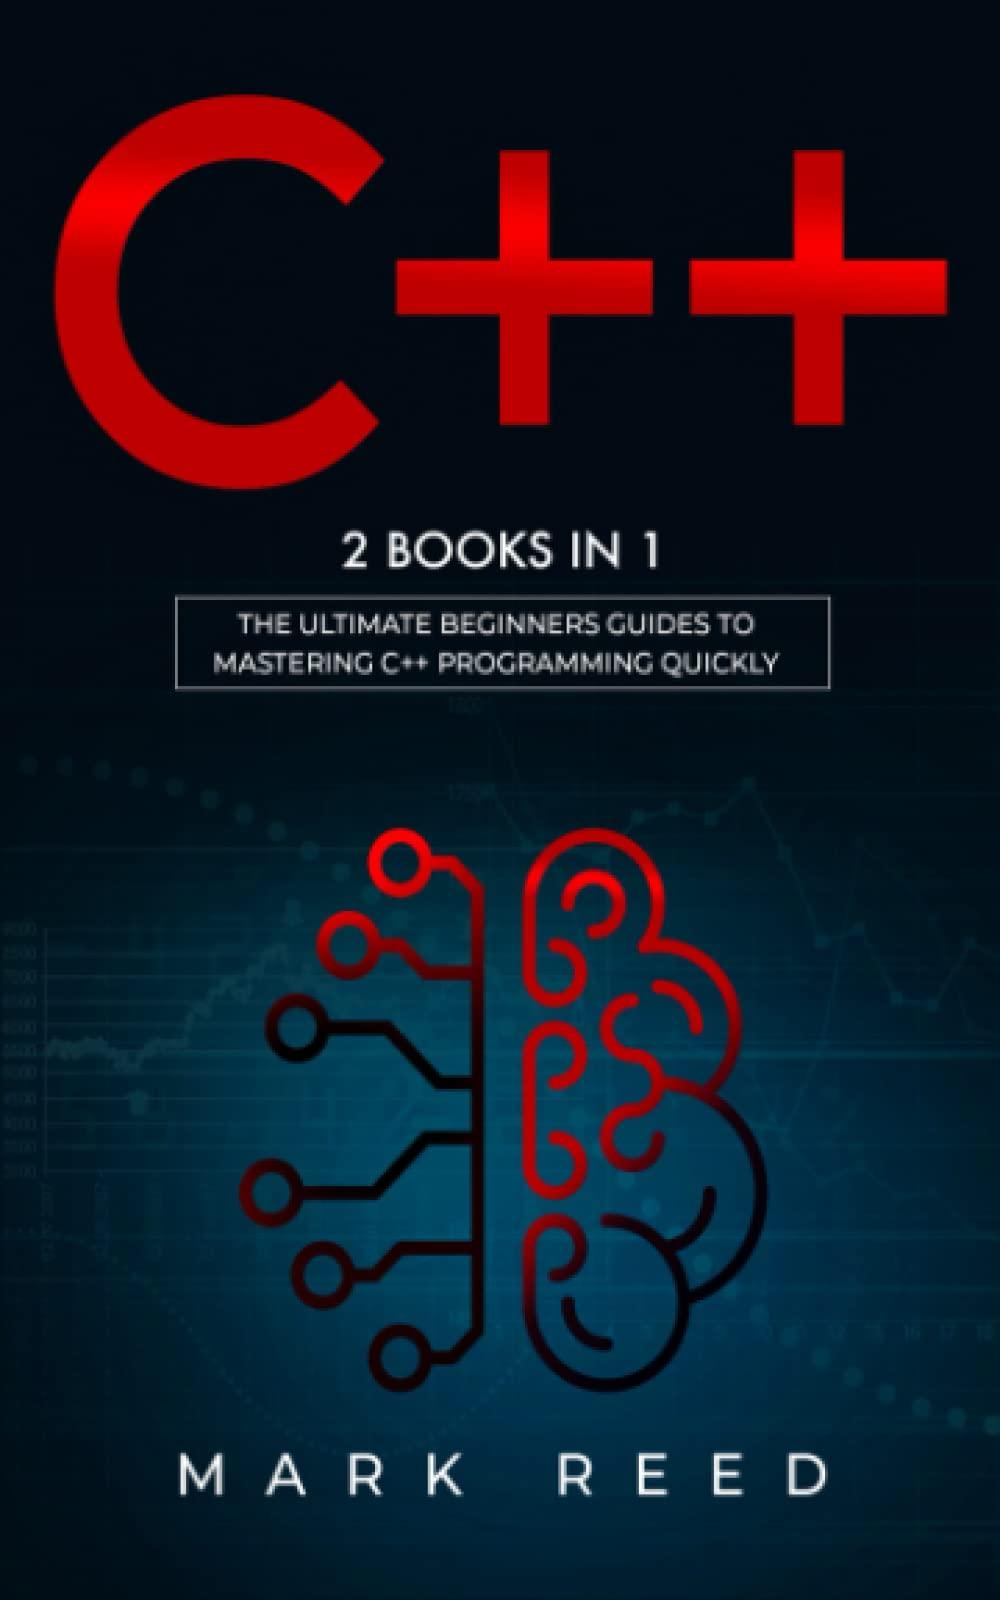 c++ 2 books in 1 the ultimate beginners guide to mastering c++ programming and implement a robust program